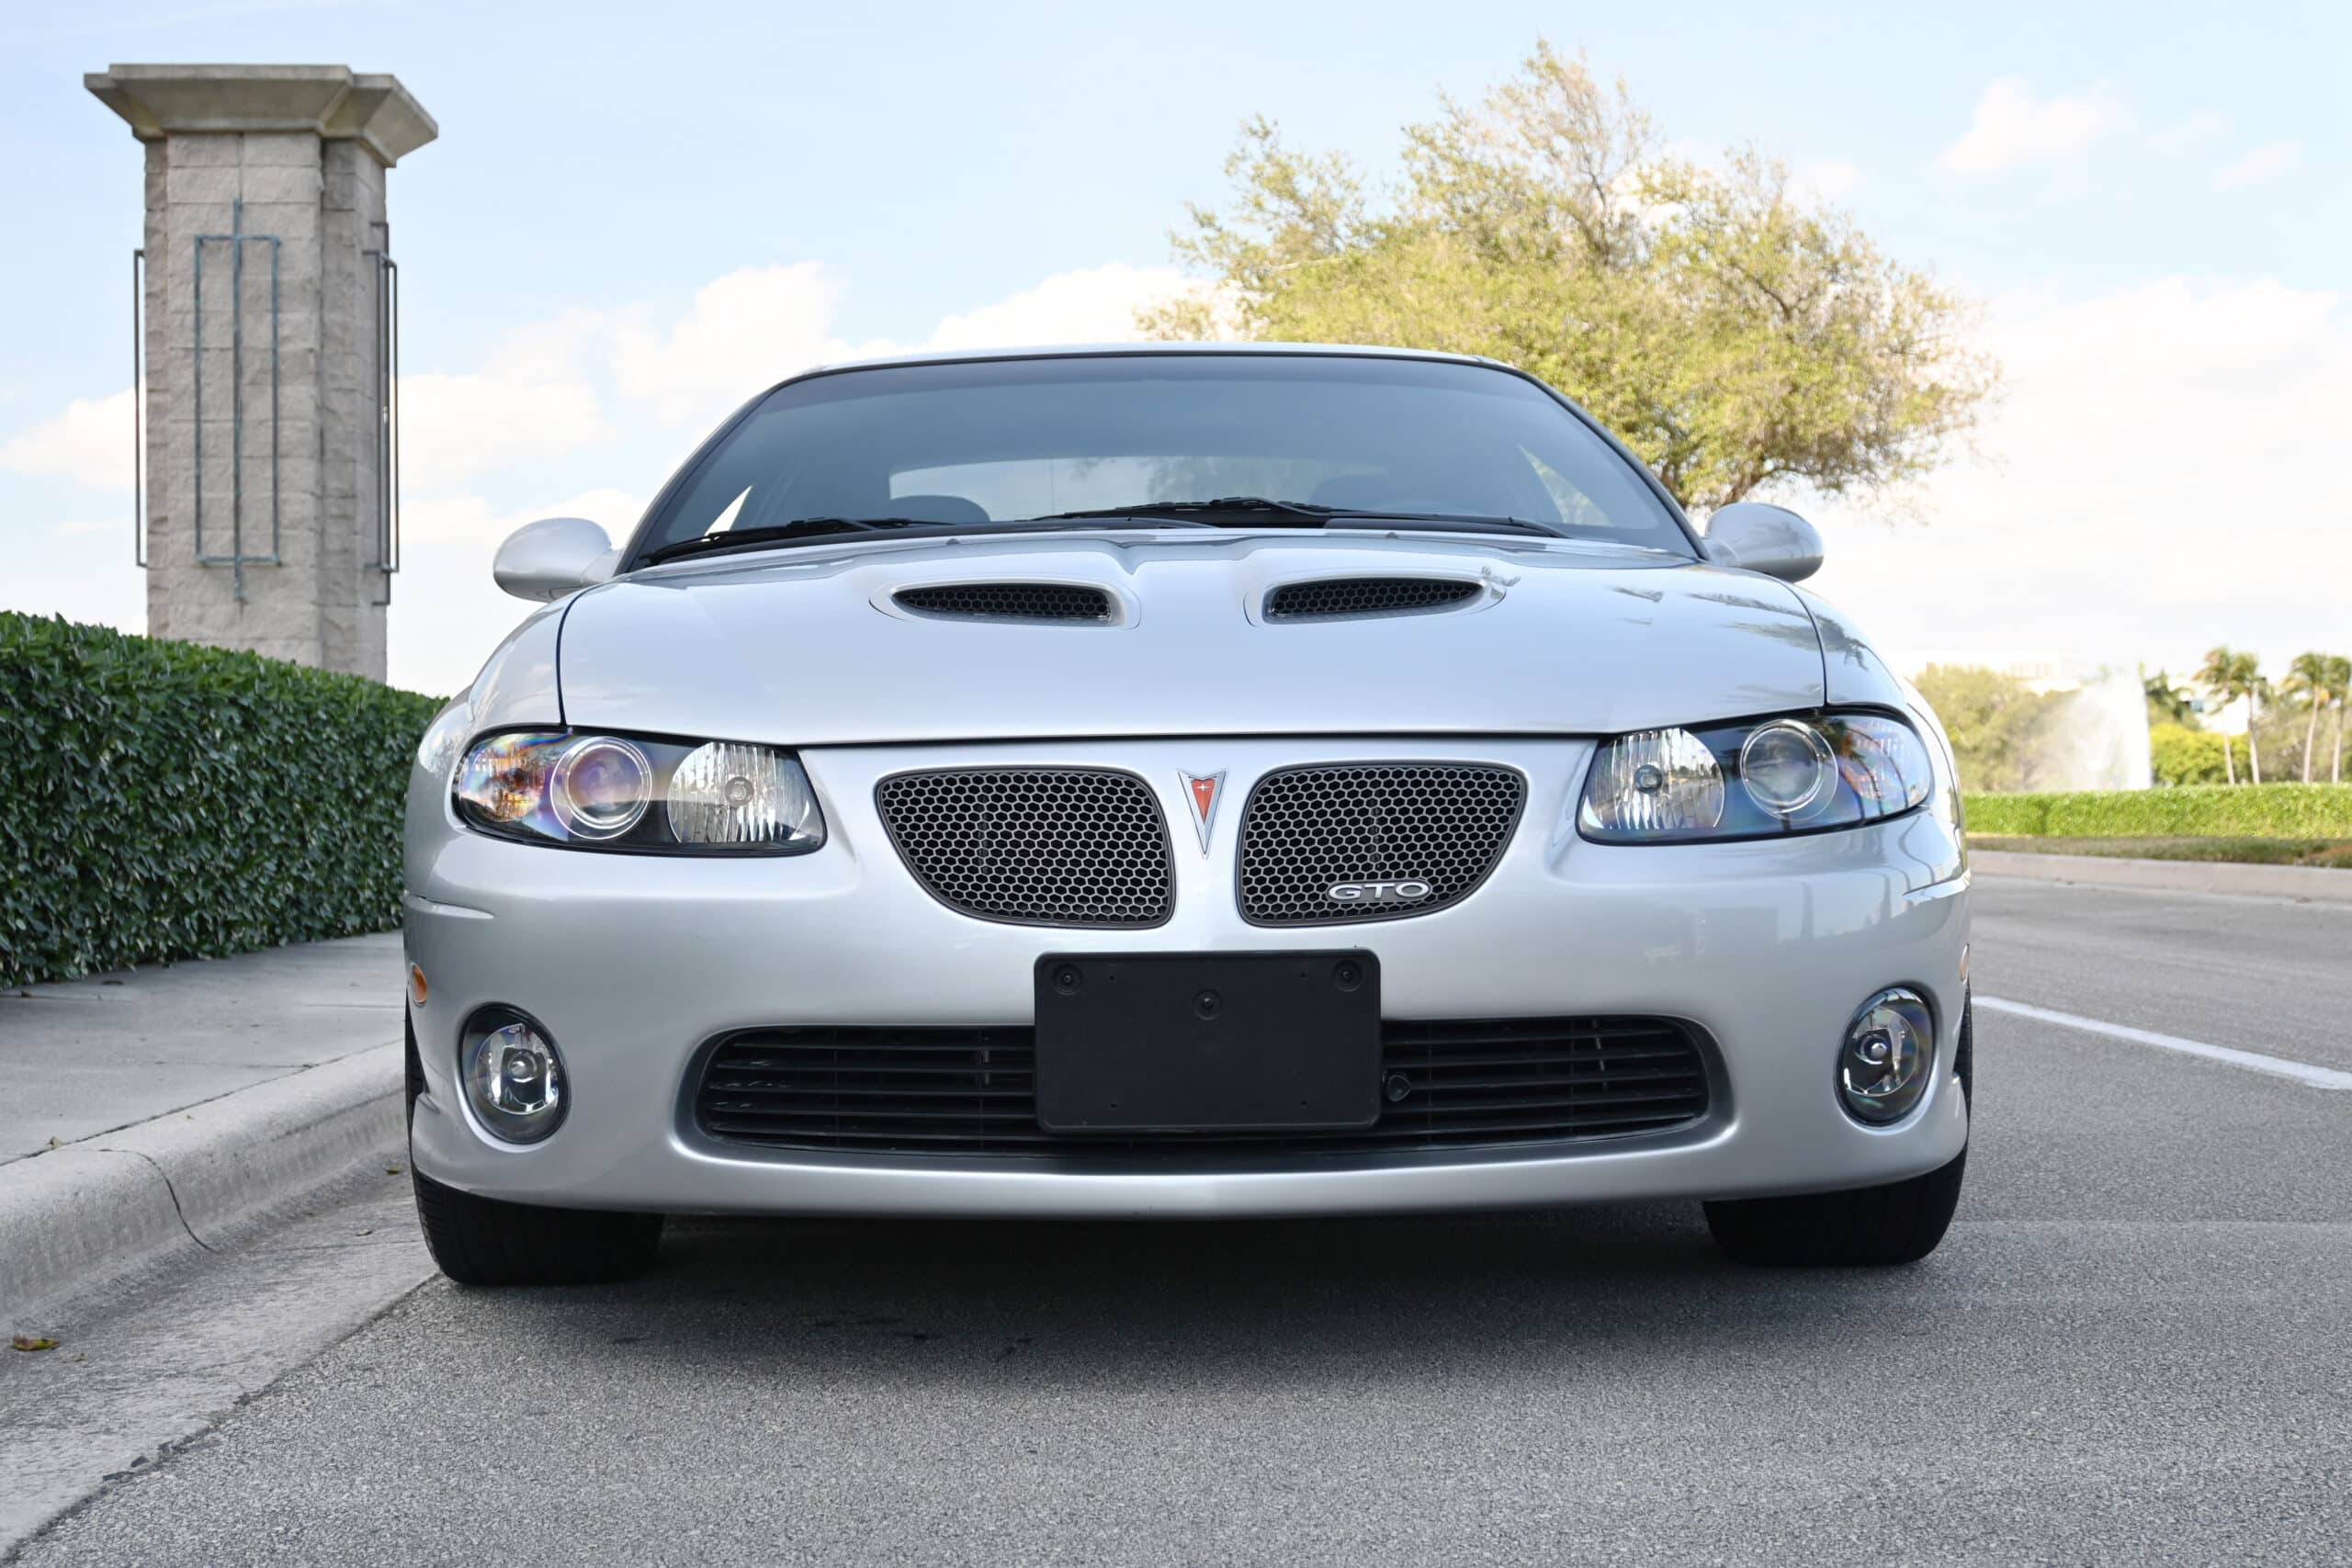 2005 Pontiac GTO, only 15K miles, same owner for 15 years, Magnuson Supercharger kit 550HP